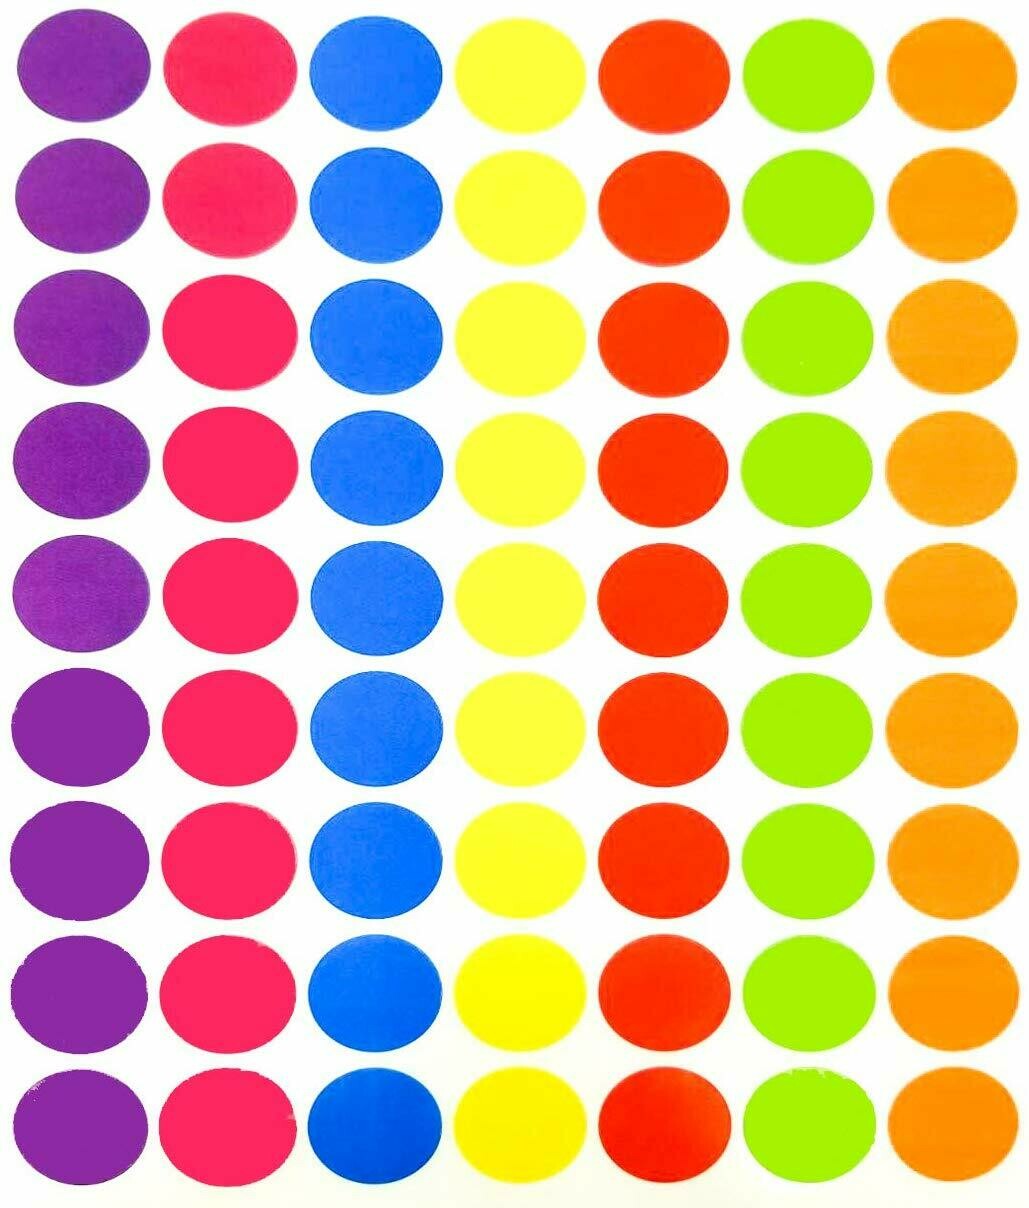 Tag-A-Room 1 Inch Round Color Coding Circle Dot Sticker Labels, 7 Bright Colors, 8 1/2" x 11" Sheet (1008 Pack)